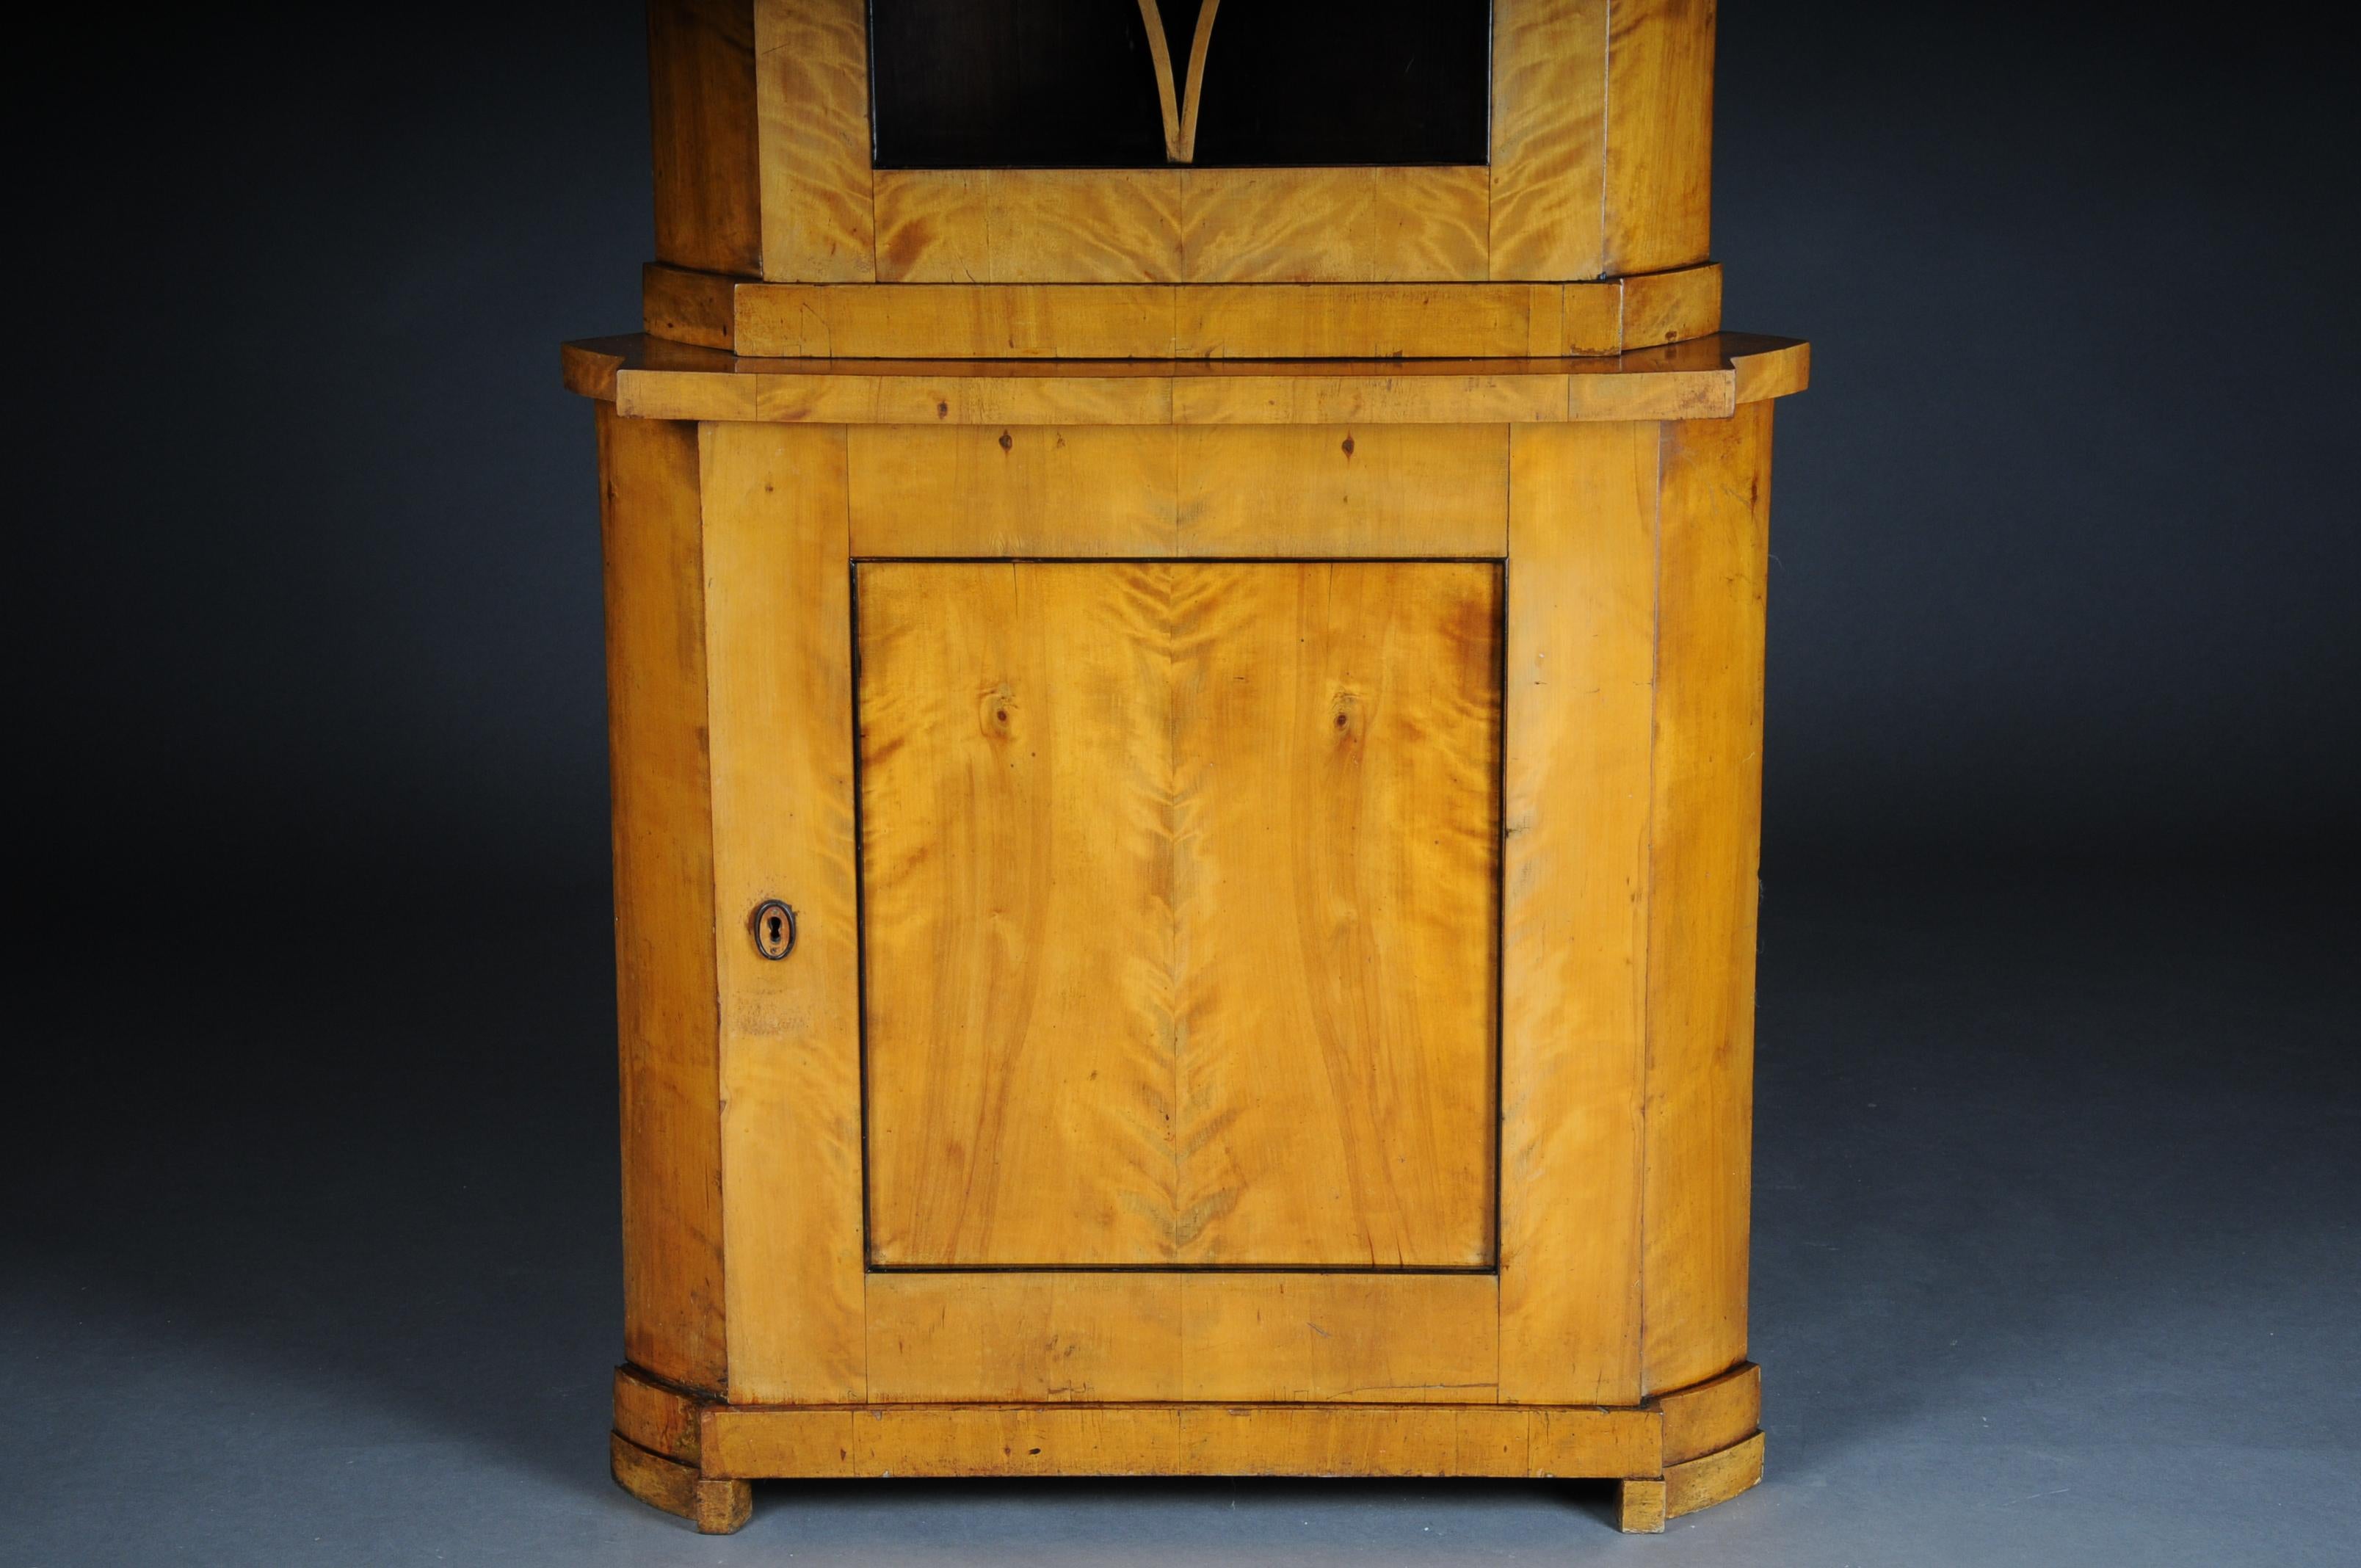 19th century Fancy Biedermeier corner cupboard, showcase, birch

Softwood birch solid, partially veneered and ebonized. Fancy shape. Showcase with rung glazing. Closed base cabinet. Both doors lockable. Multiple structure with a so-called Schinkel